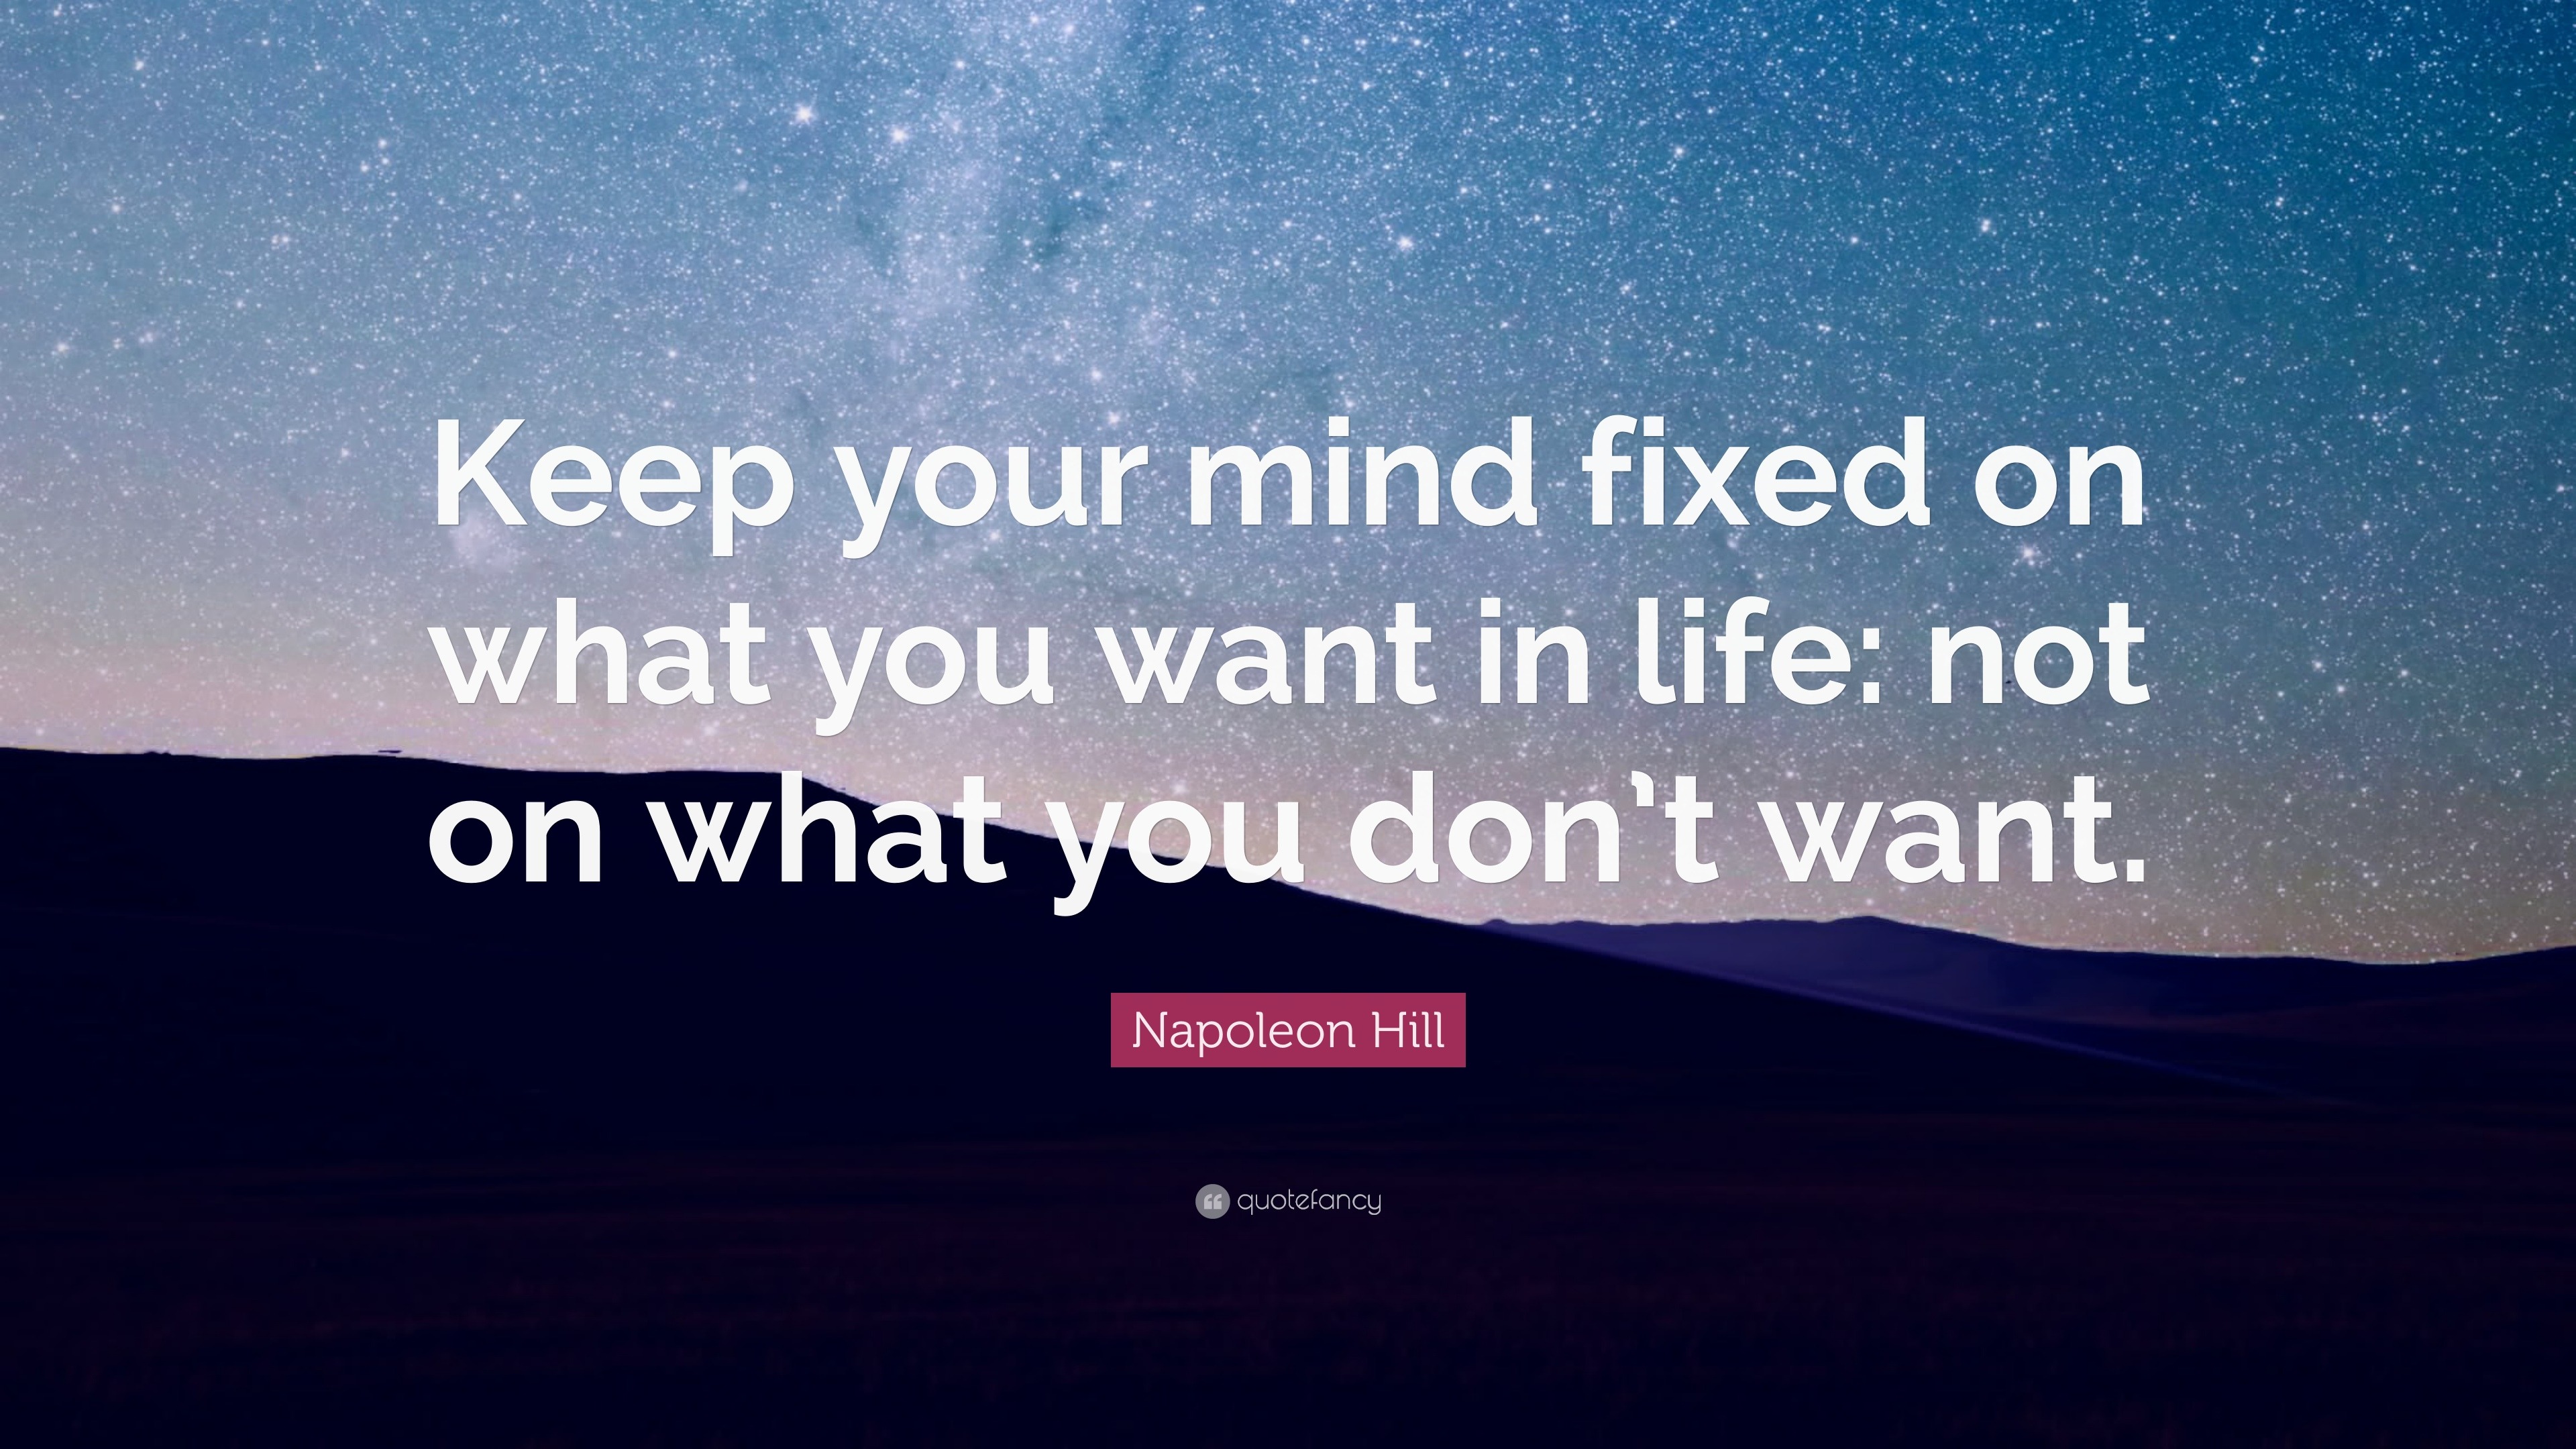 Napoleon Hill Quote: “Keep your mind fixed on what you want in life ...